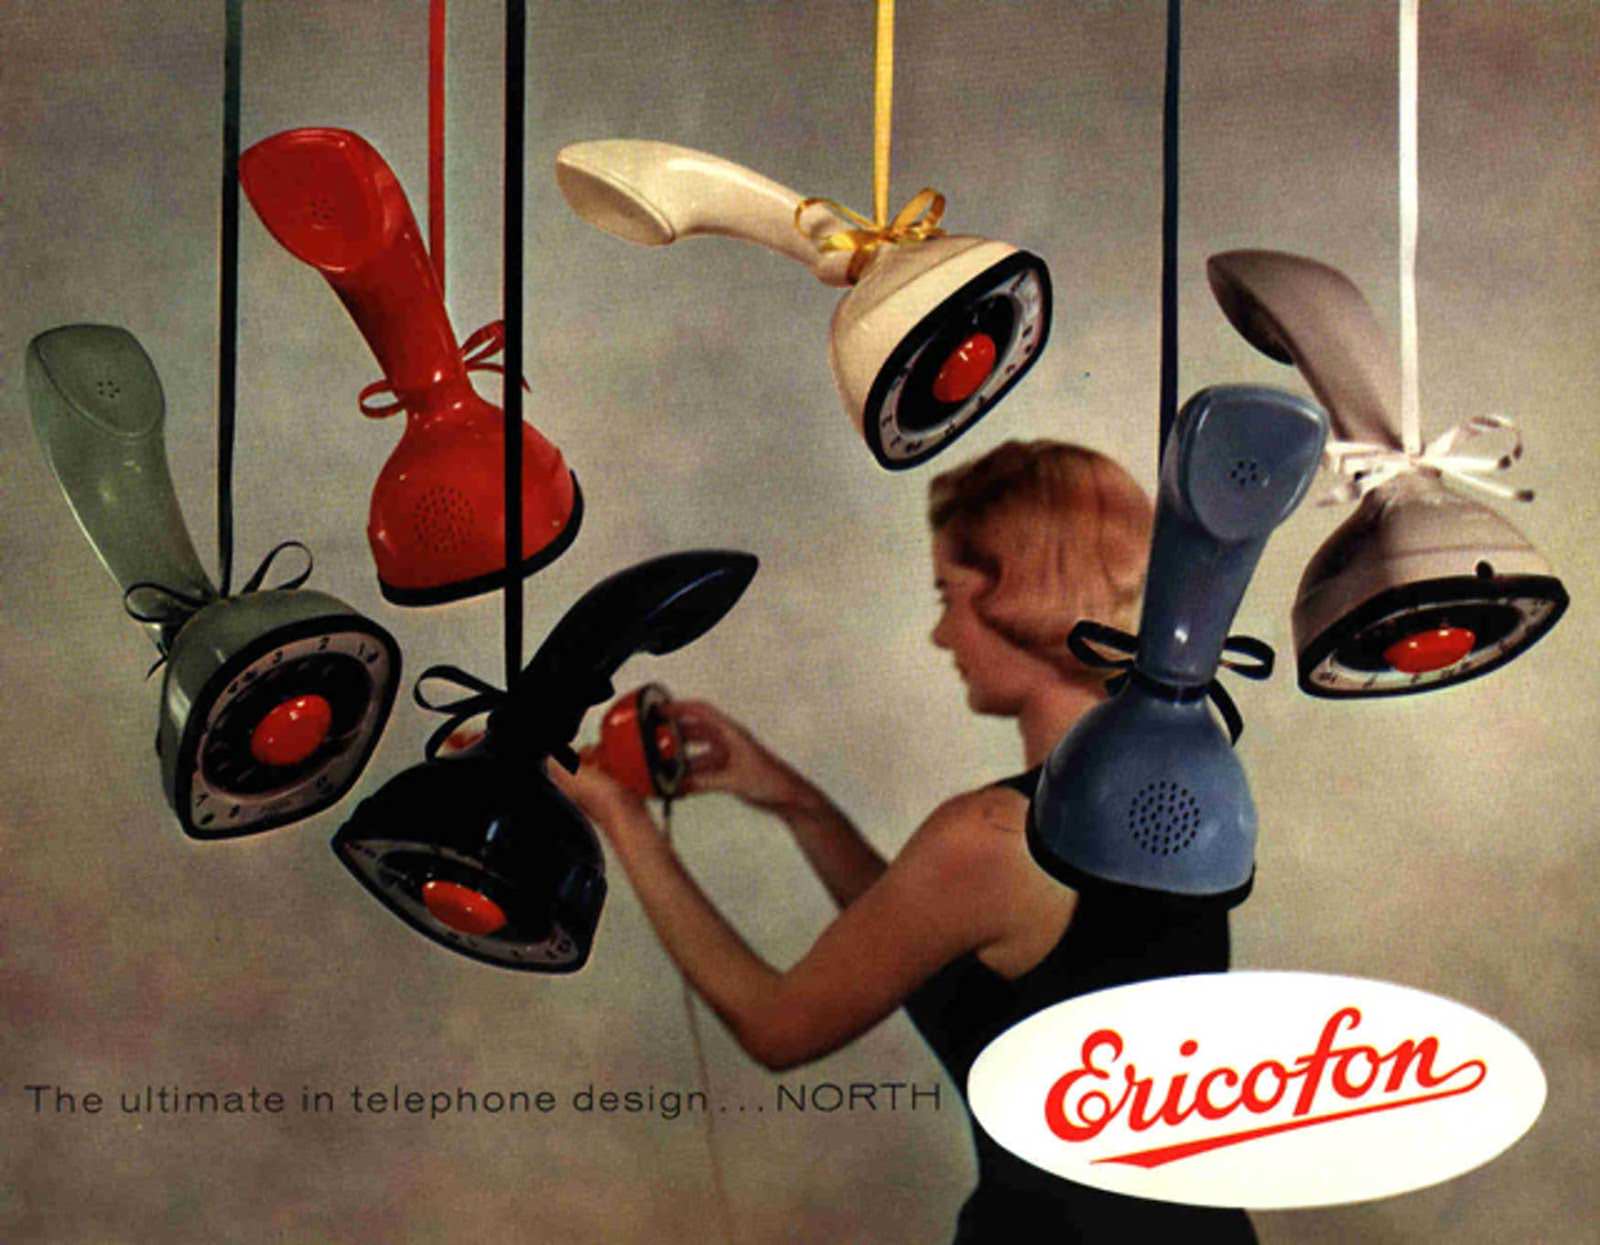 Vintage Ads of Ericofon: The Lightest One-Piece Rotary Dial Telephone introduced in the 1950s